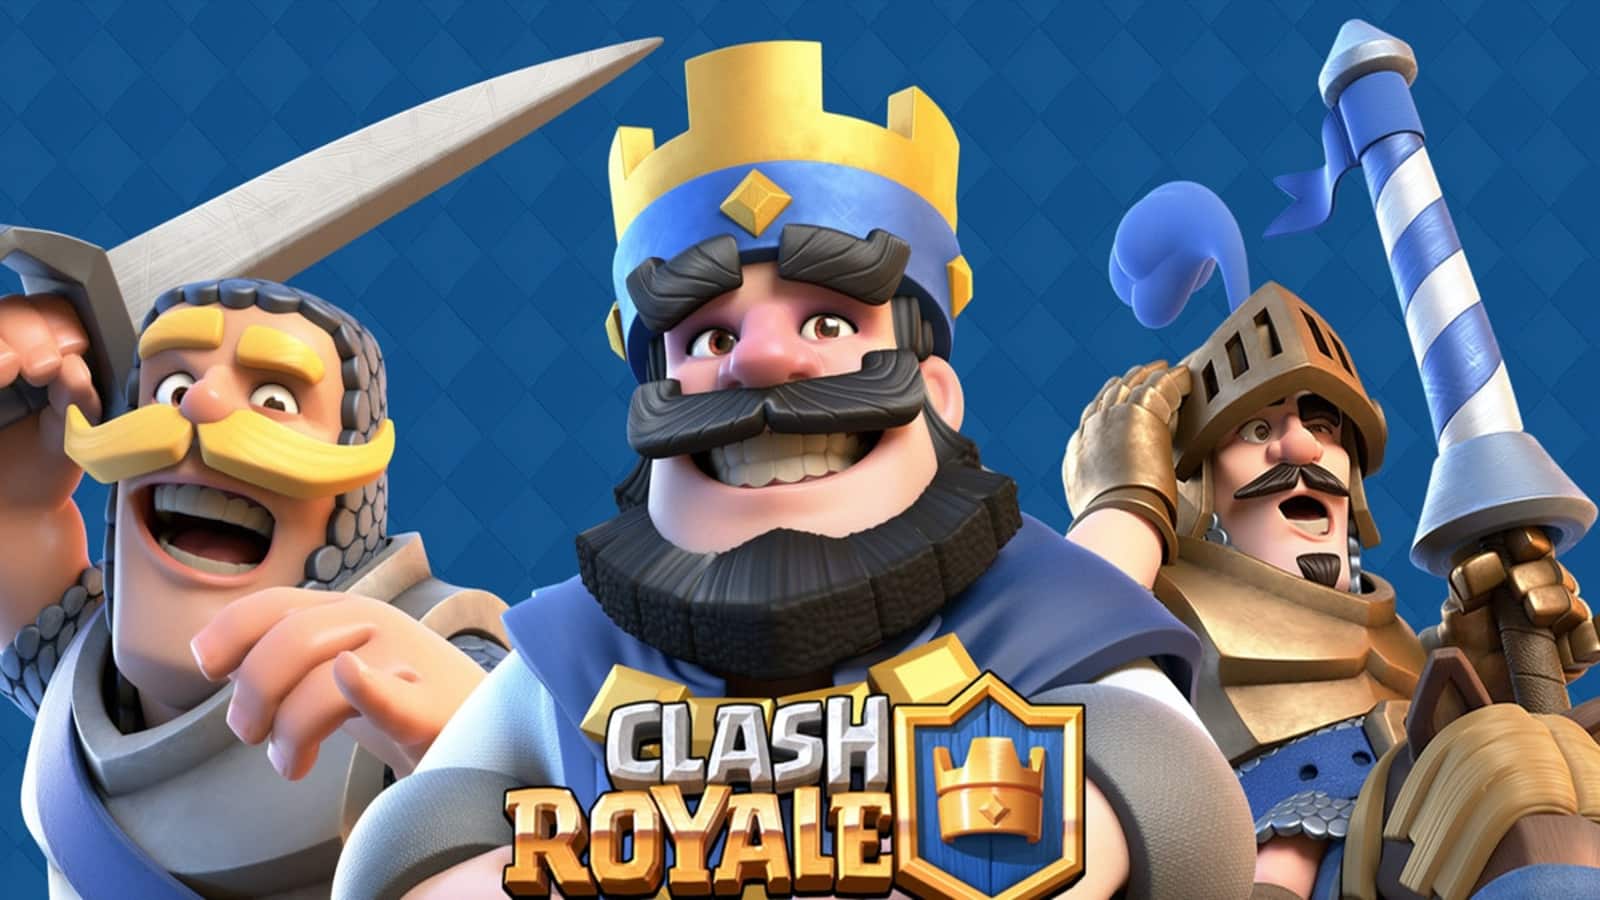 Clash Royale is a mobile dek builder where players attempt to battle each other